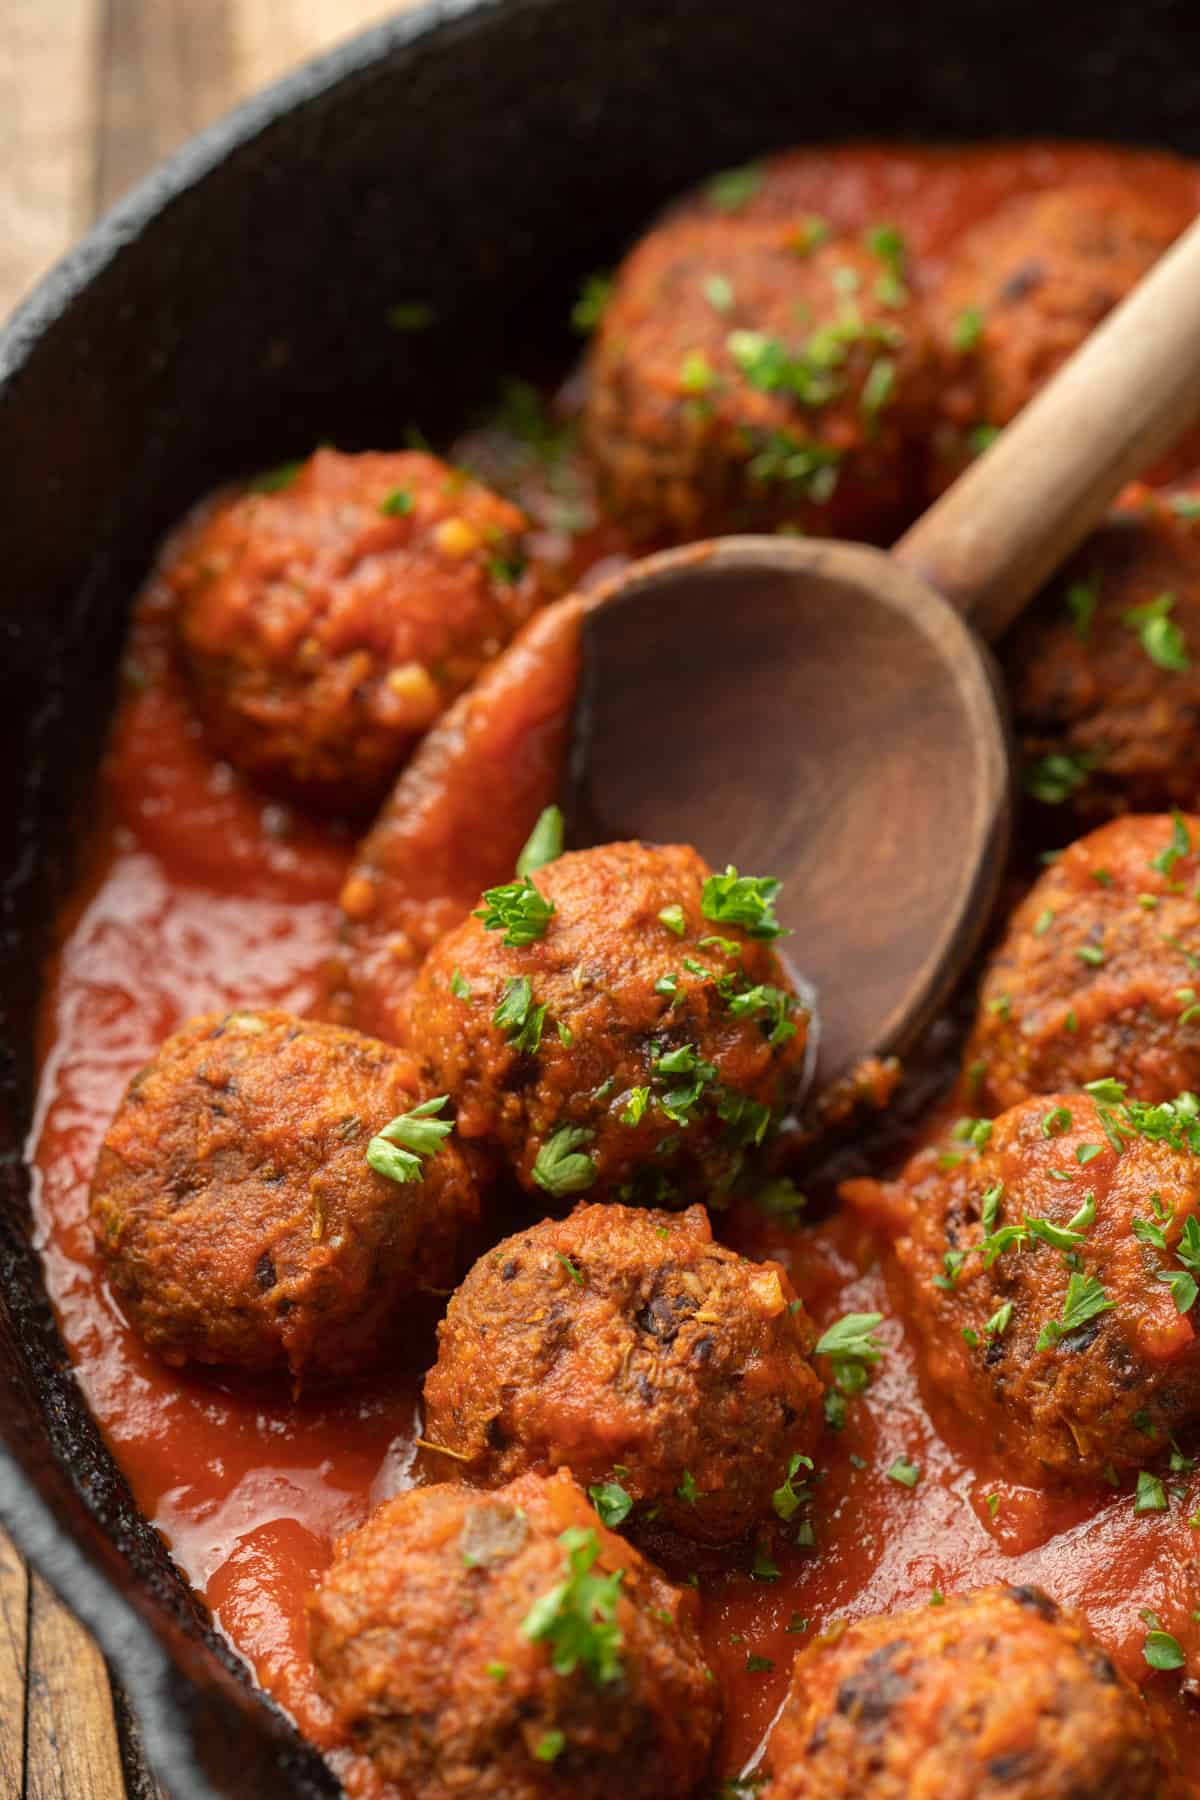 Wooden spoon scooping a Vegan Meatball from a skillet.